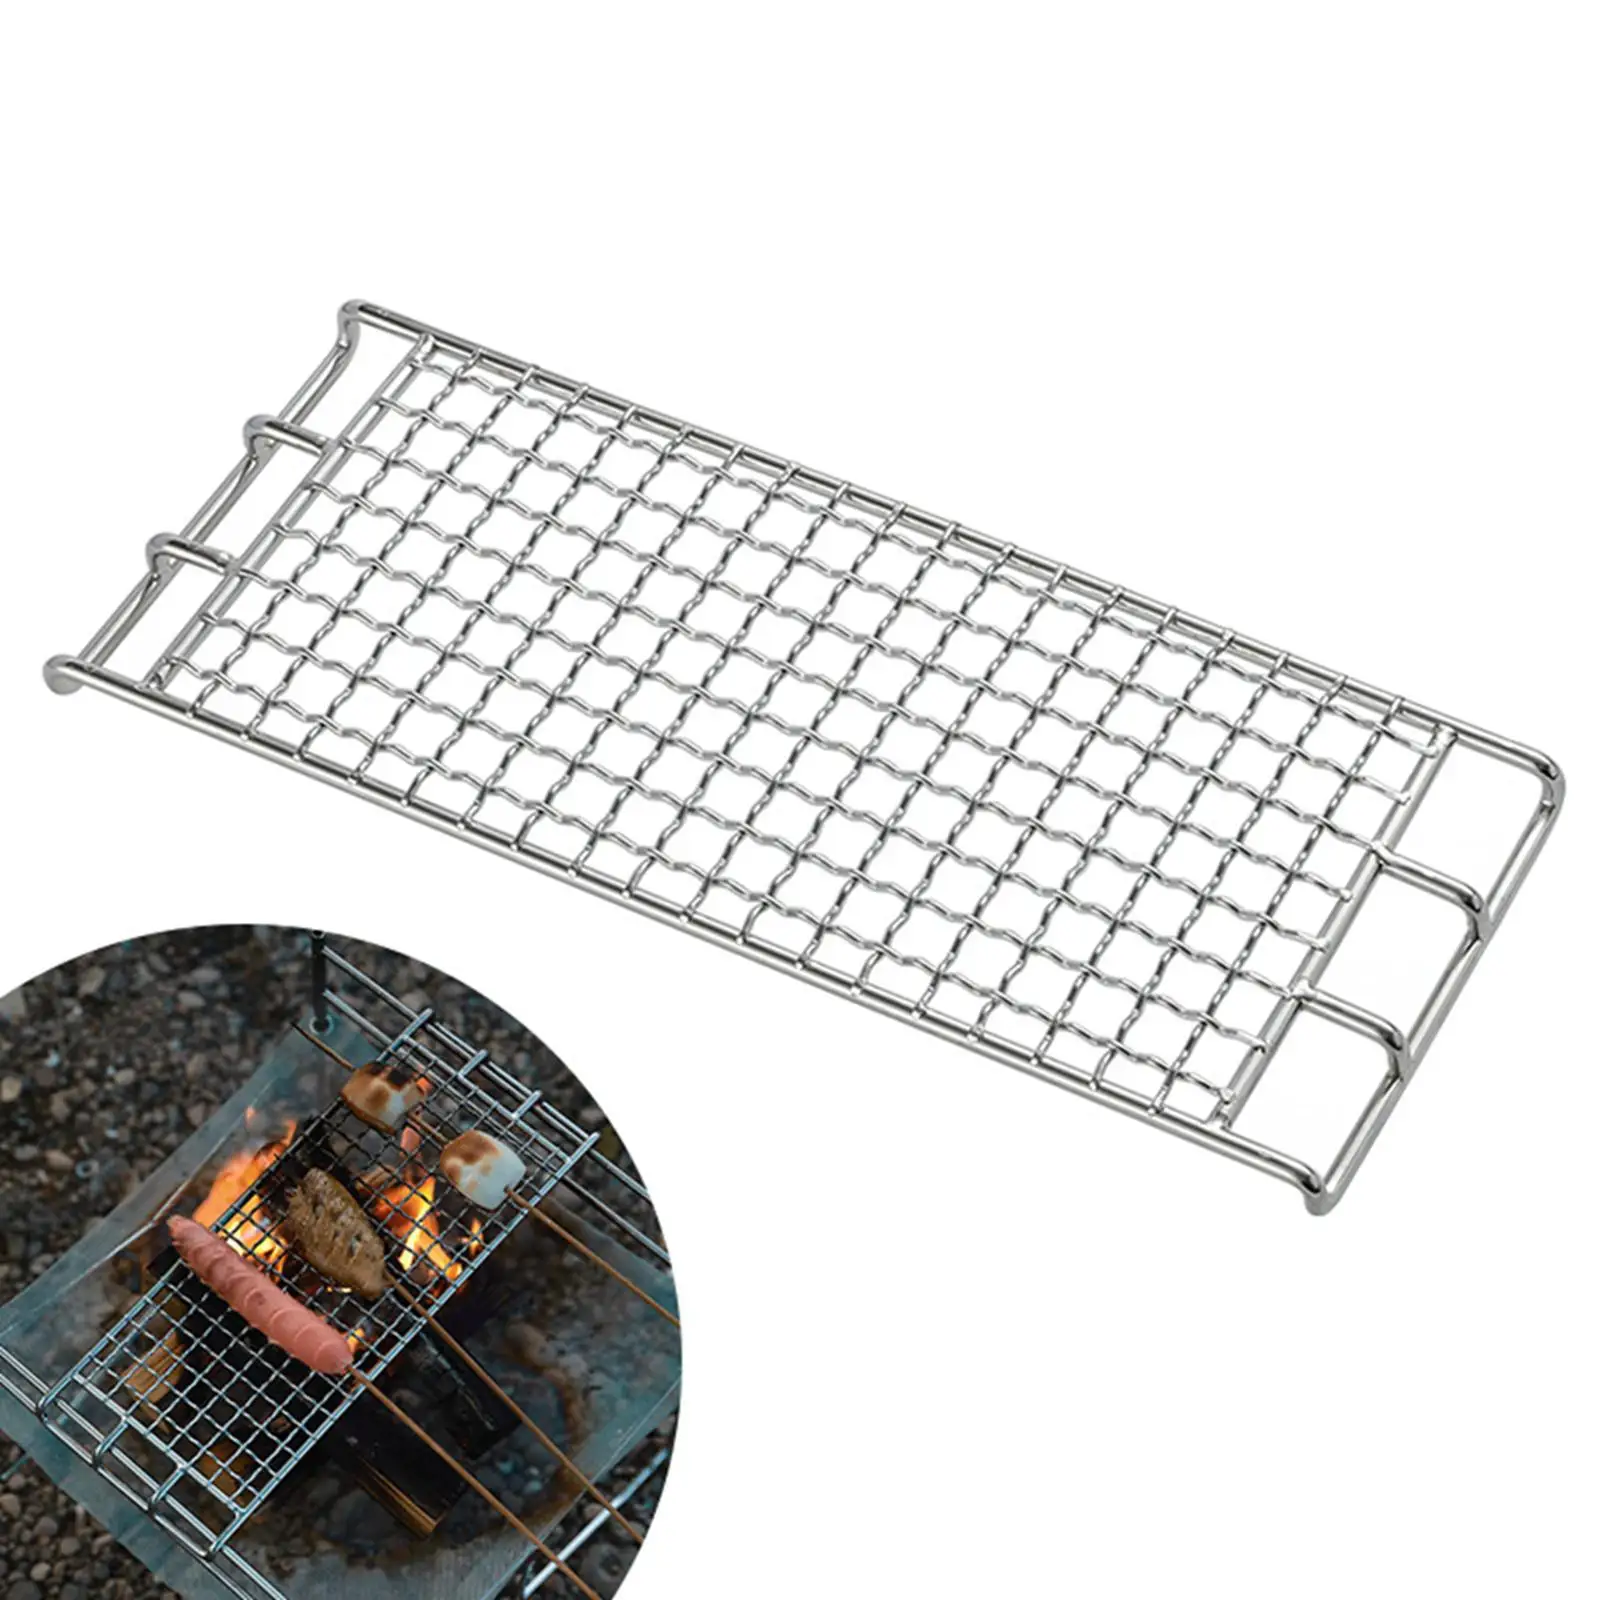 BBQ Grilling Basket Stainless Steel Mesh Wire Net Outdoor Barbecue Picnic Tool 